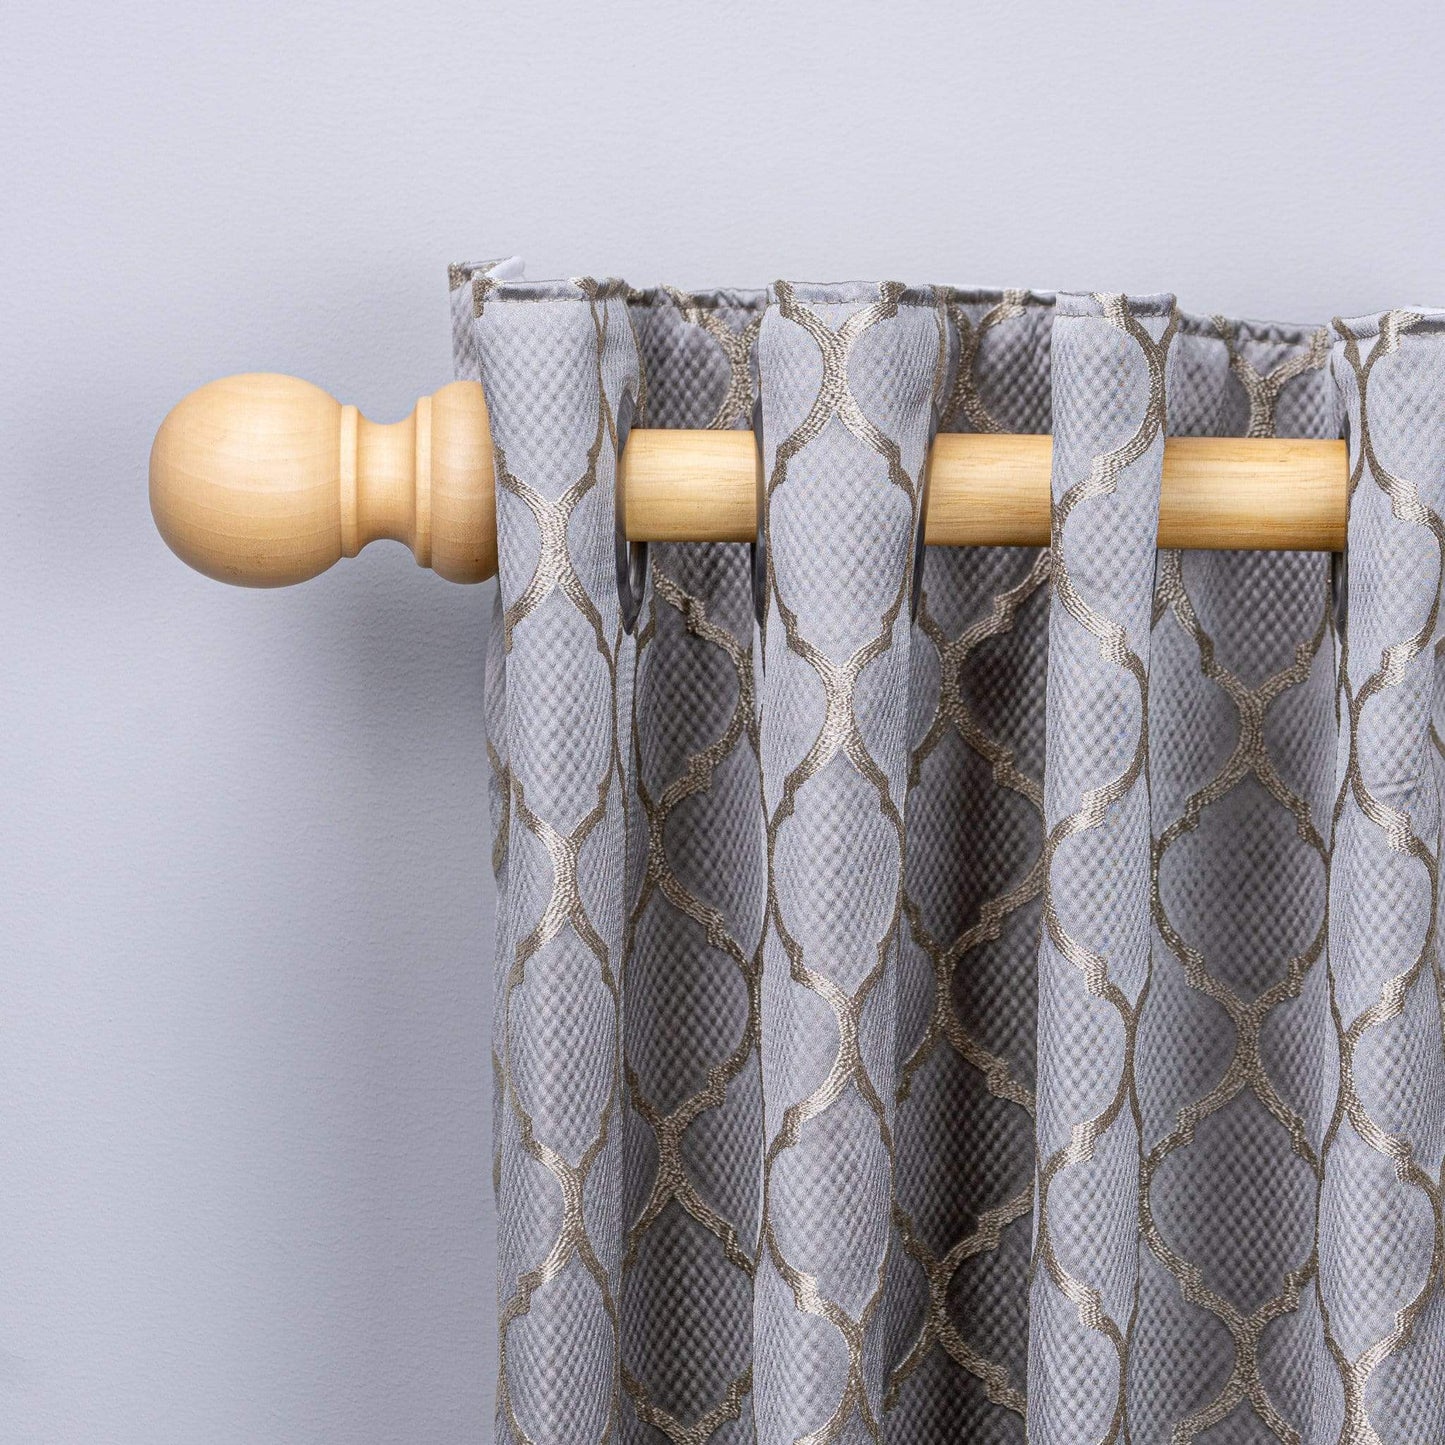 Homeware  -  Light Ash Wooden Pole With Ball Finial  - 